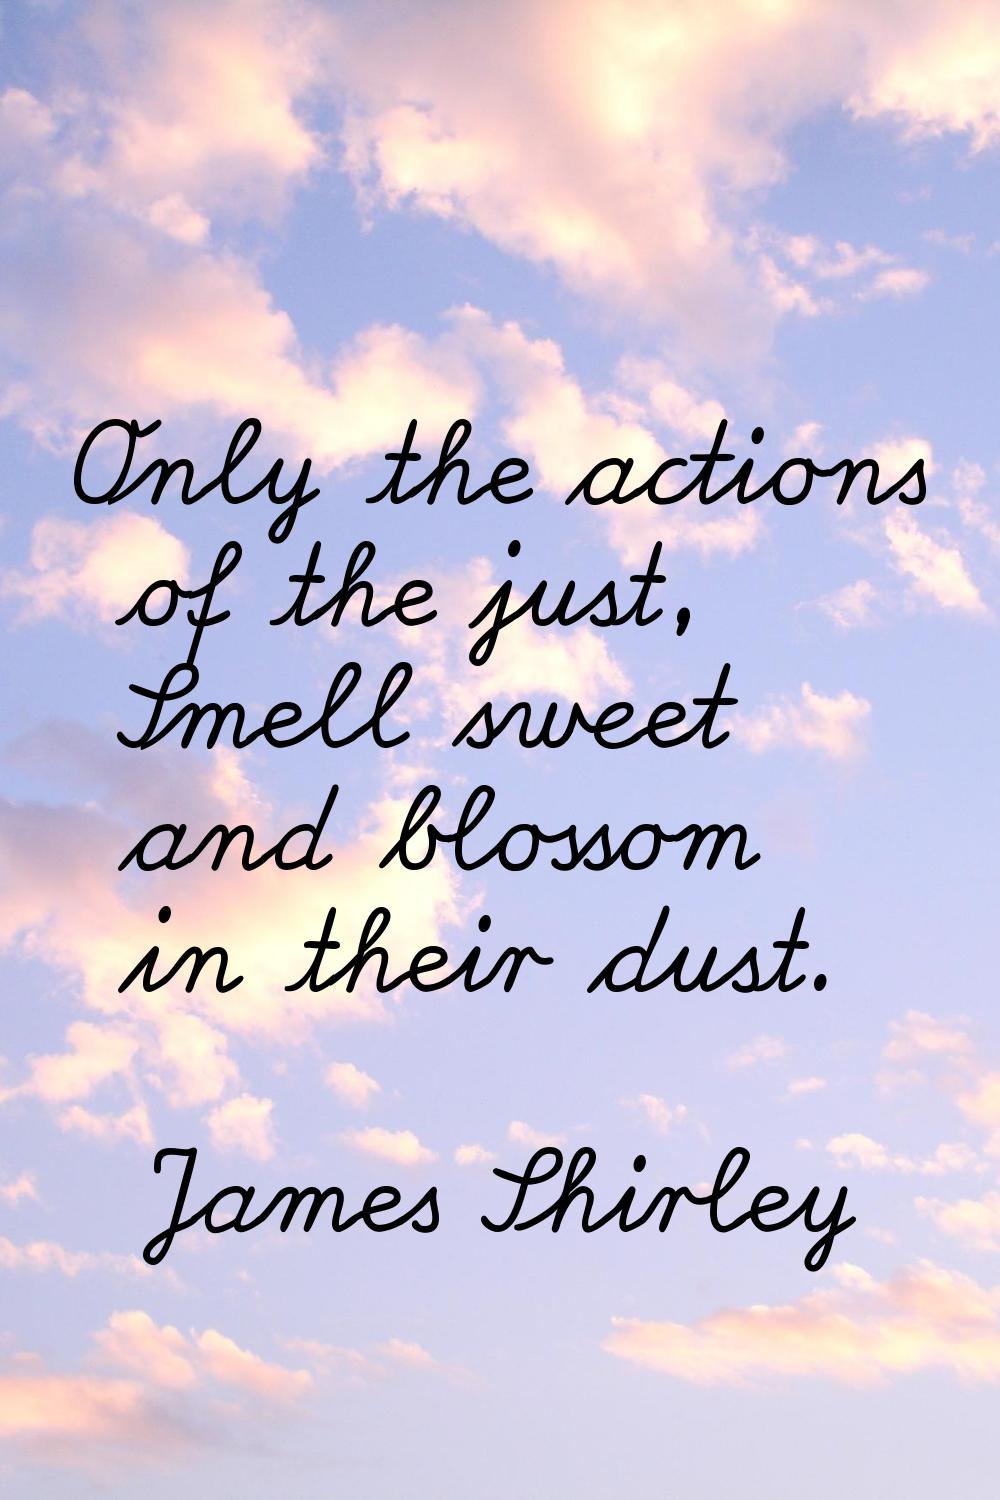 Only the actions of the just, Smell sweet and blossom in their dust.